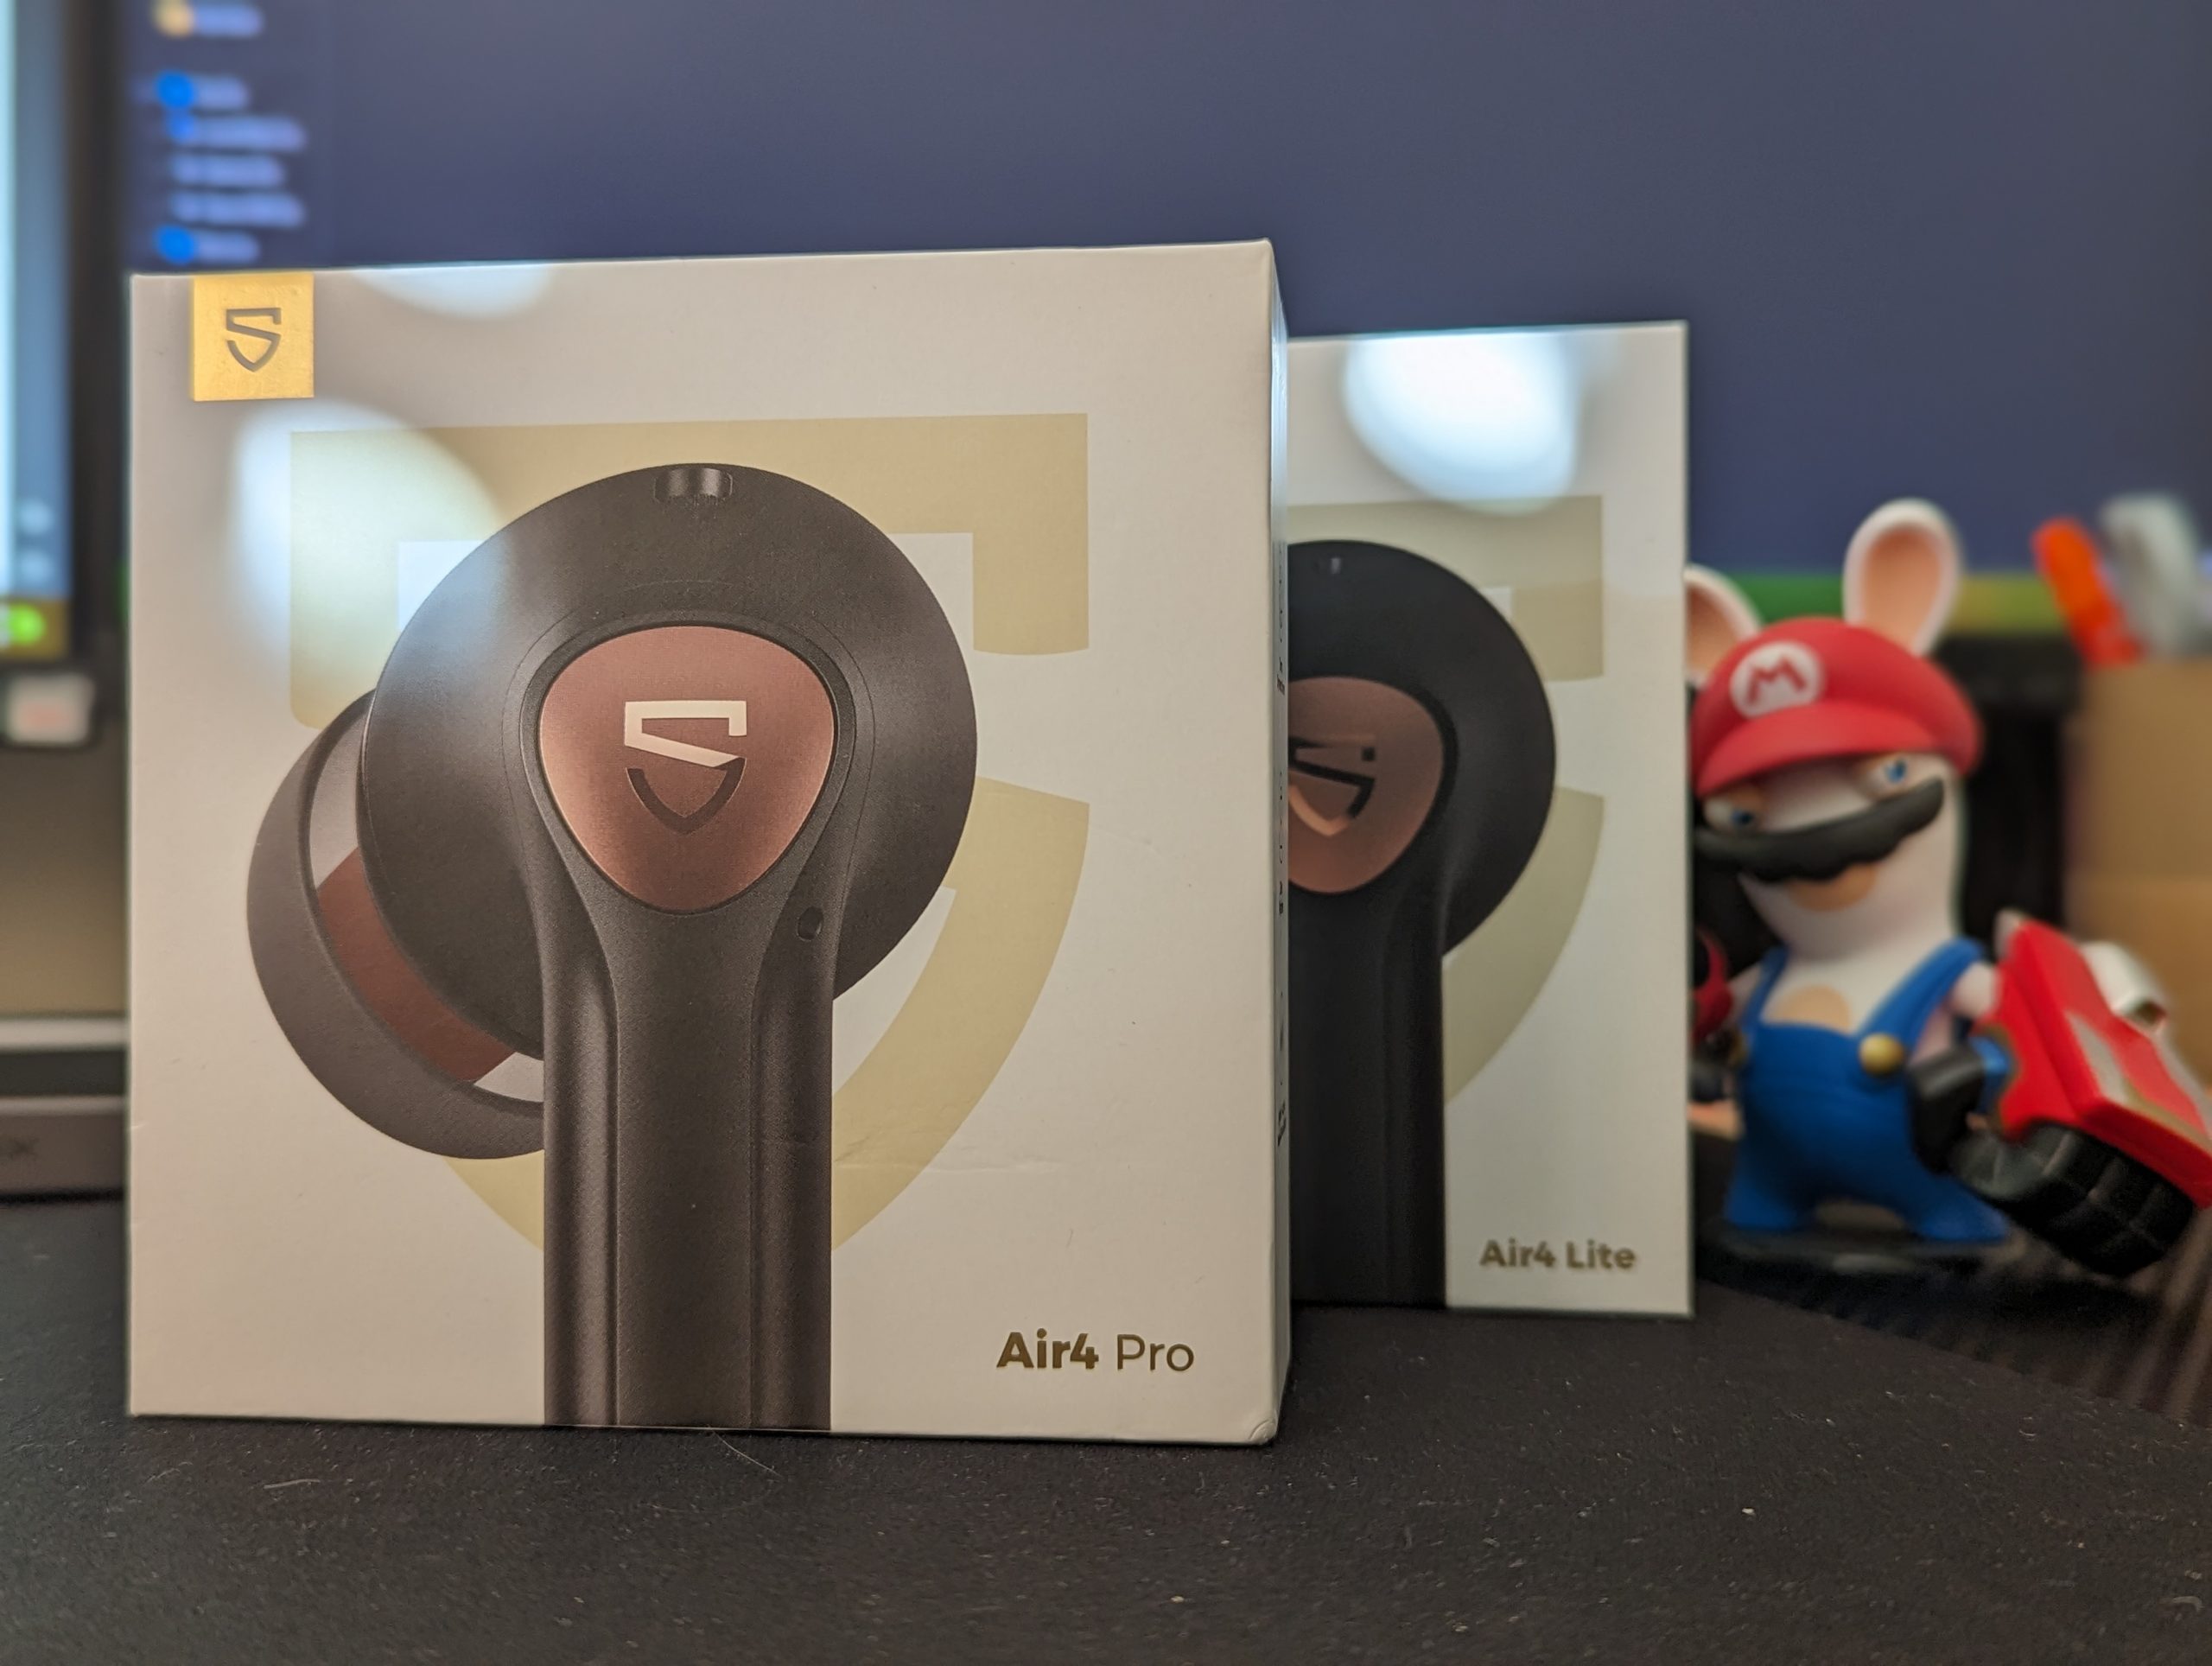 Soundpeats Air4 Pro vs Air4 - Which is Better? 